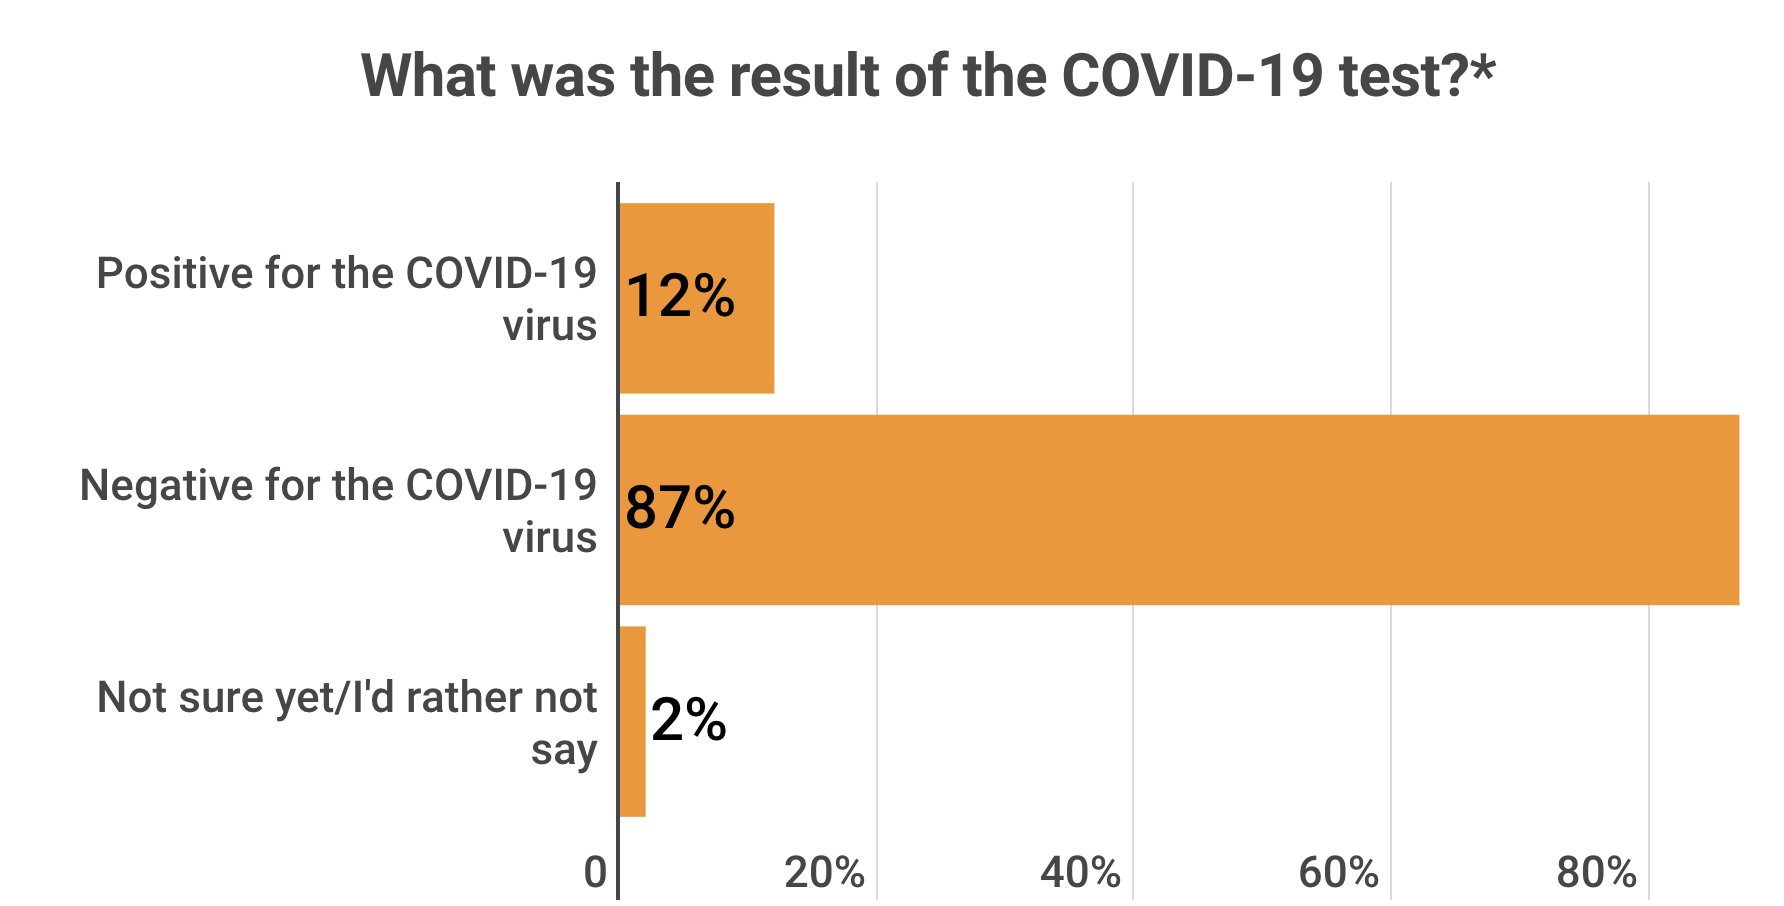 *Asked to current college students that have been tested for the COVID-19 virus since returning to campus this fall